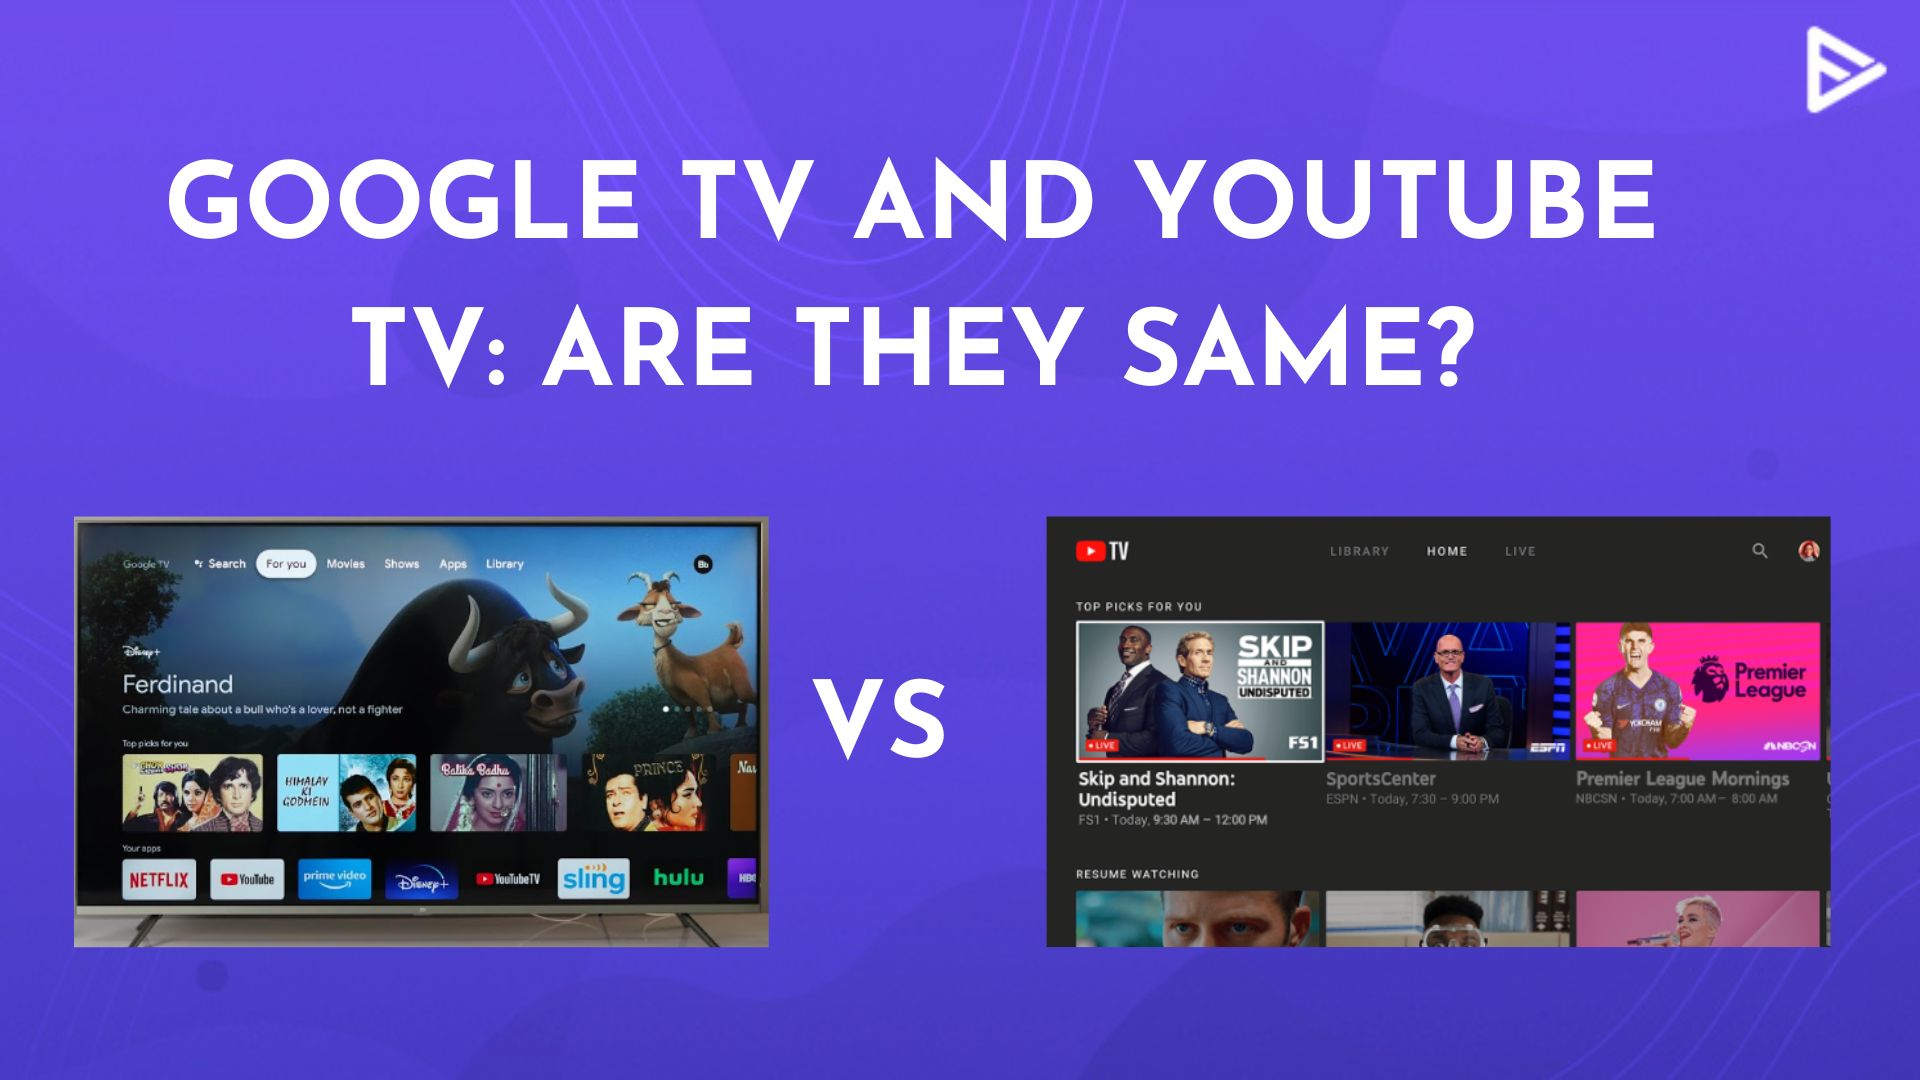 Google TV Vs YouTube TV: What’s The Difference?